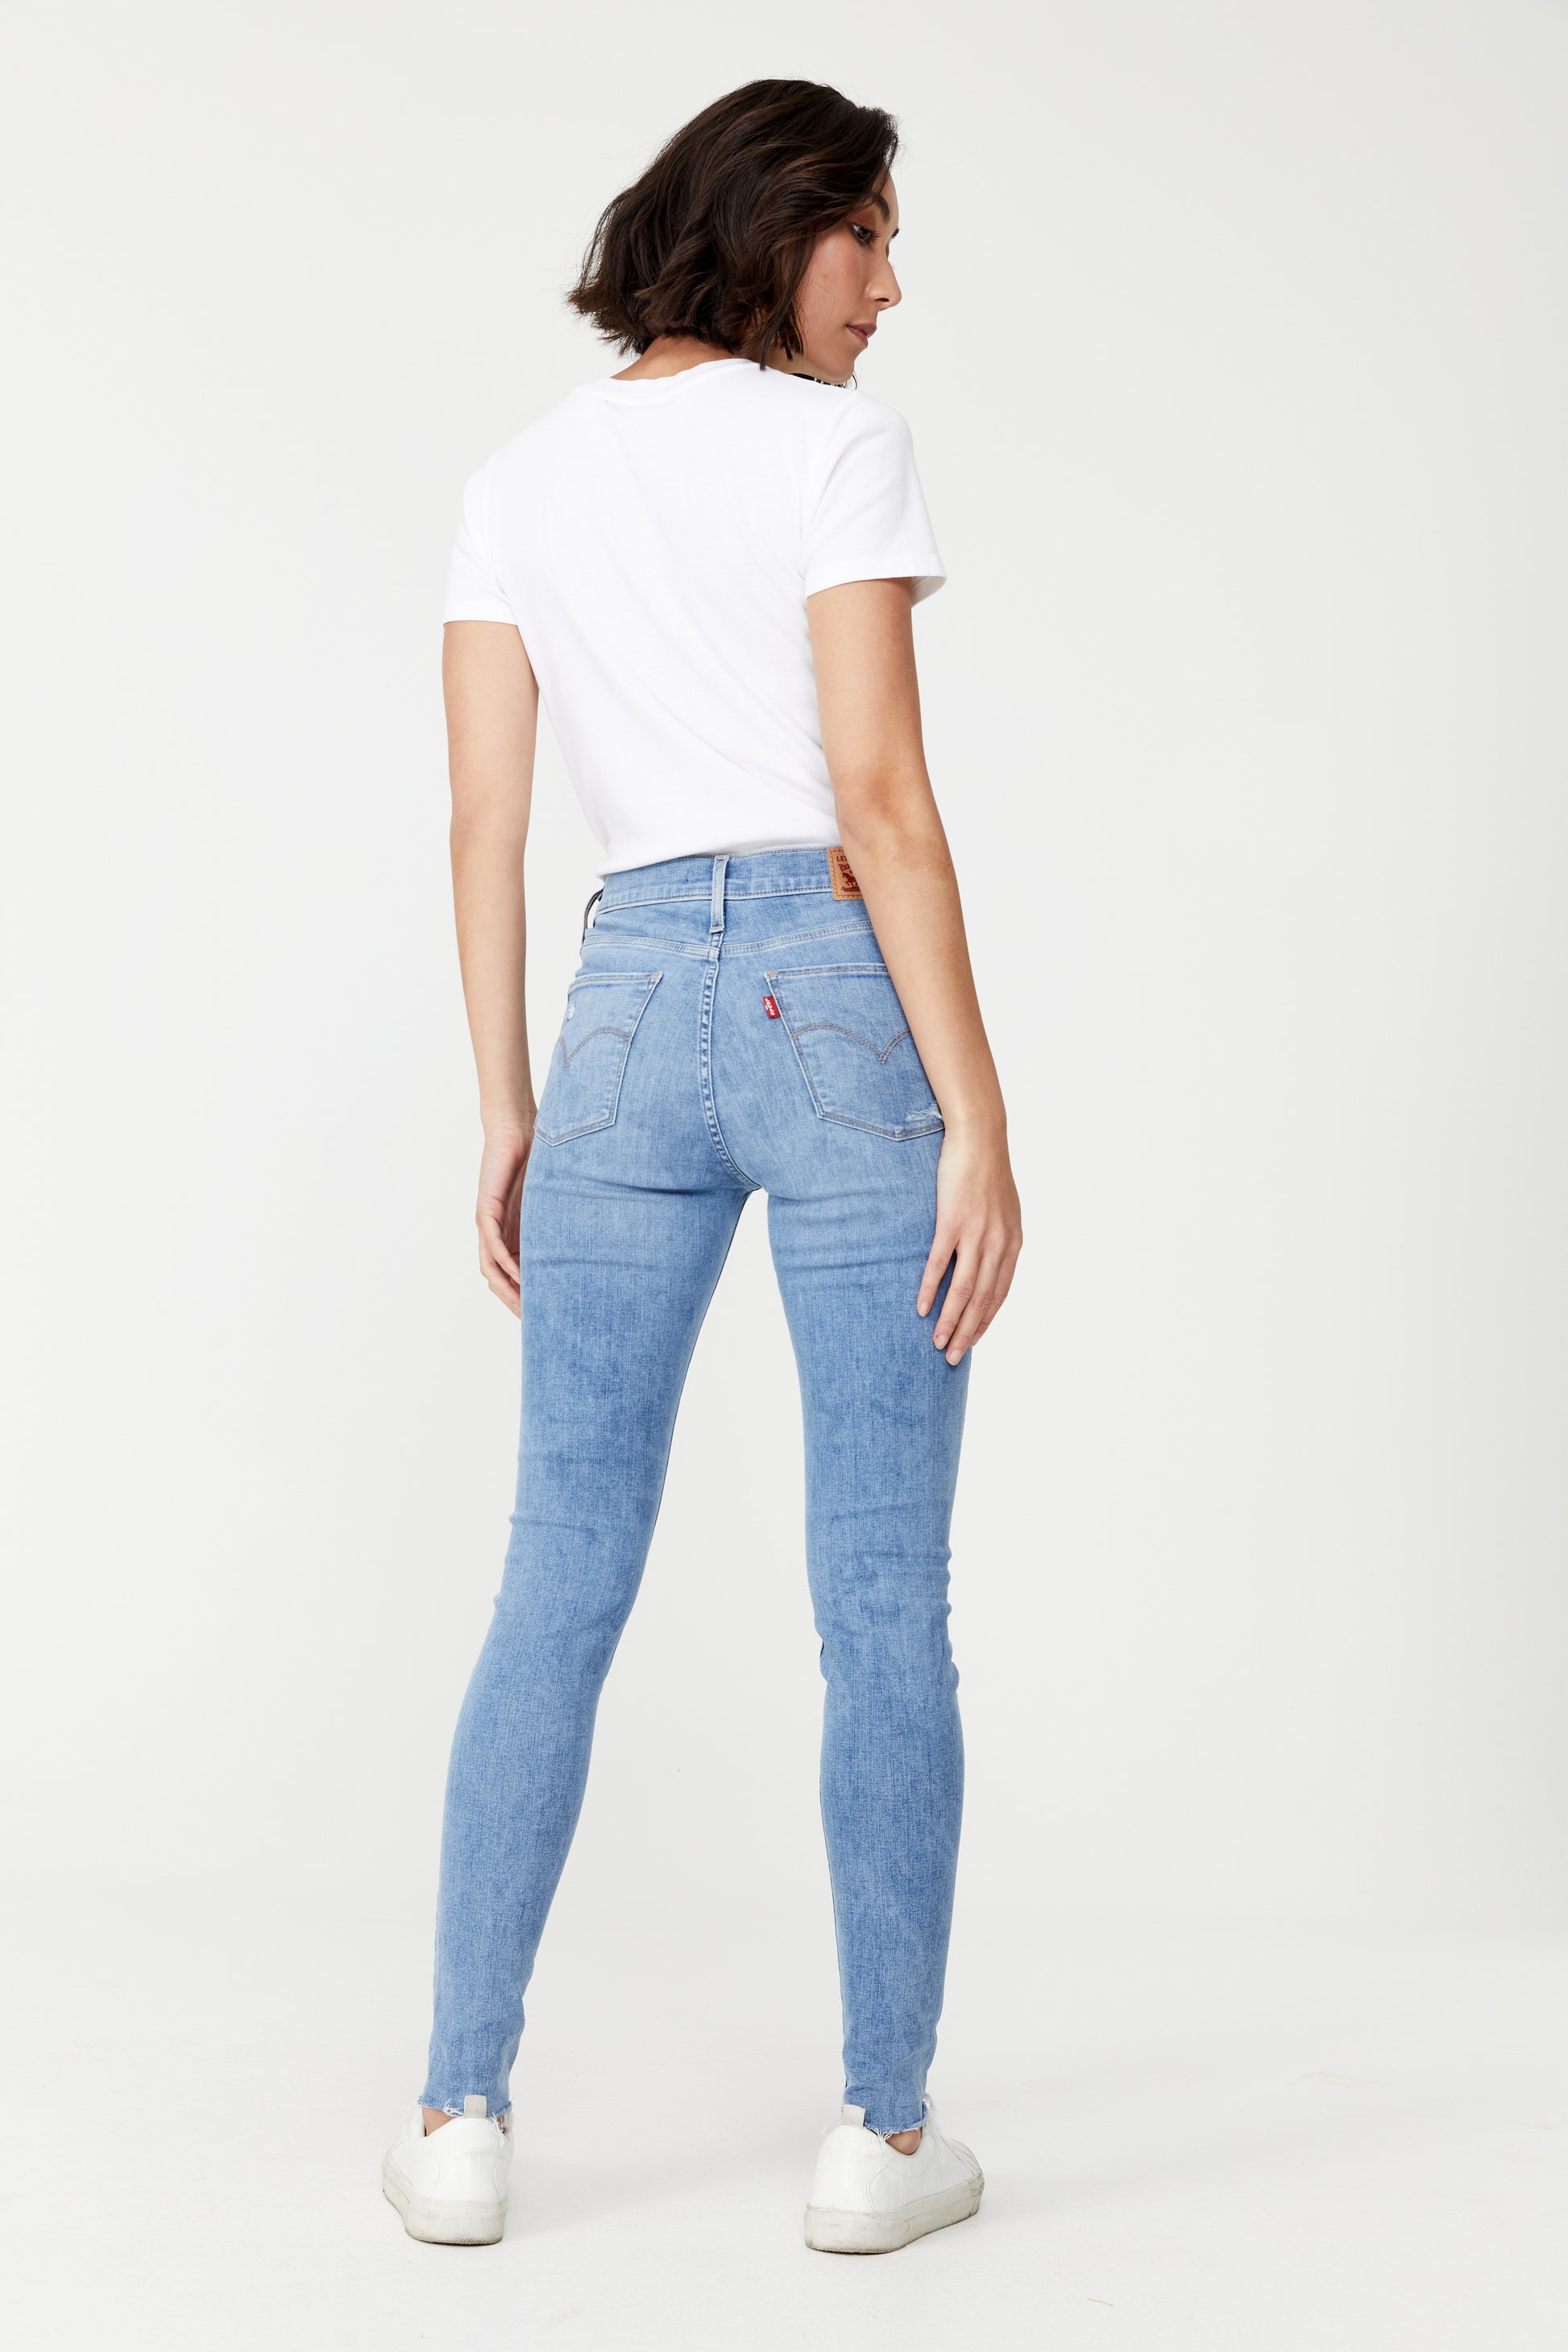 Ontario Friction 720 High Rise Super Skinny Jeans by Levis – Rawspice  Boutique